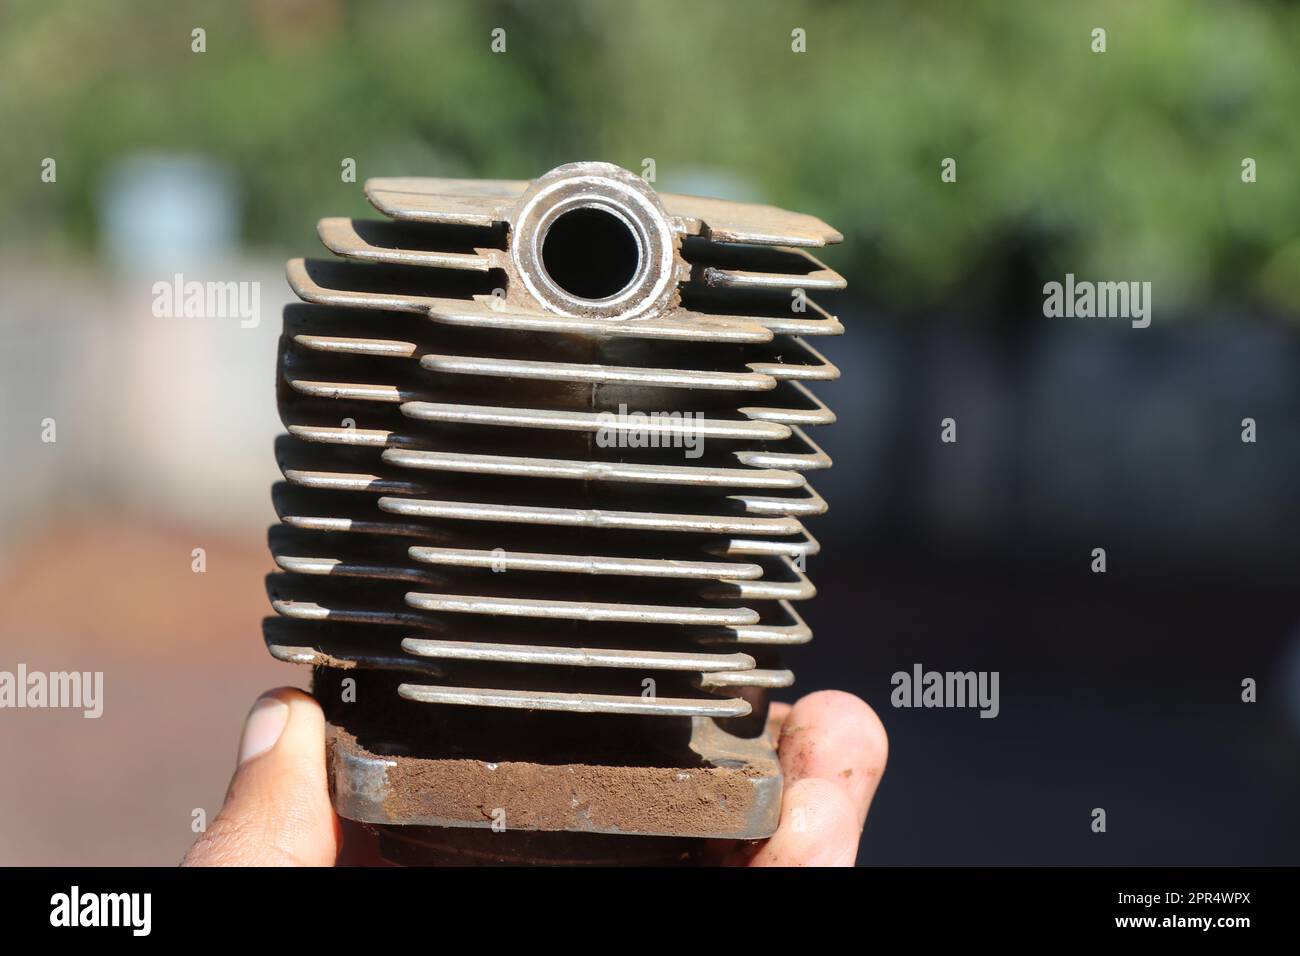 Small petrol engine cylinder head with cooling fins and a slot for adding a spark plug held in the hand Stock Photo